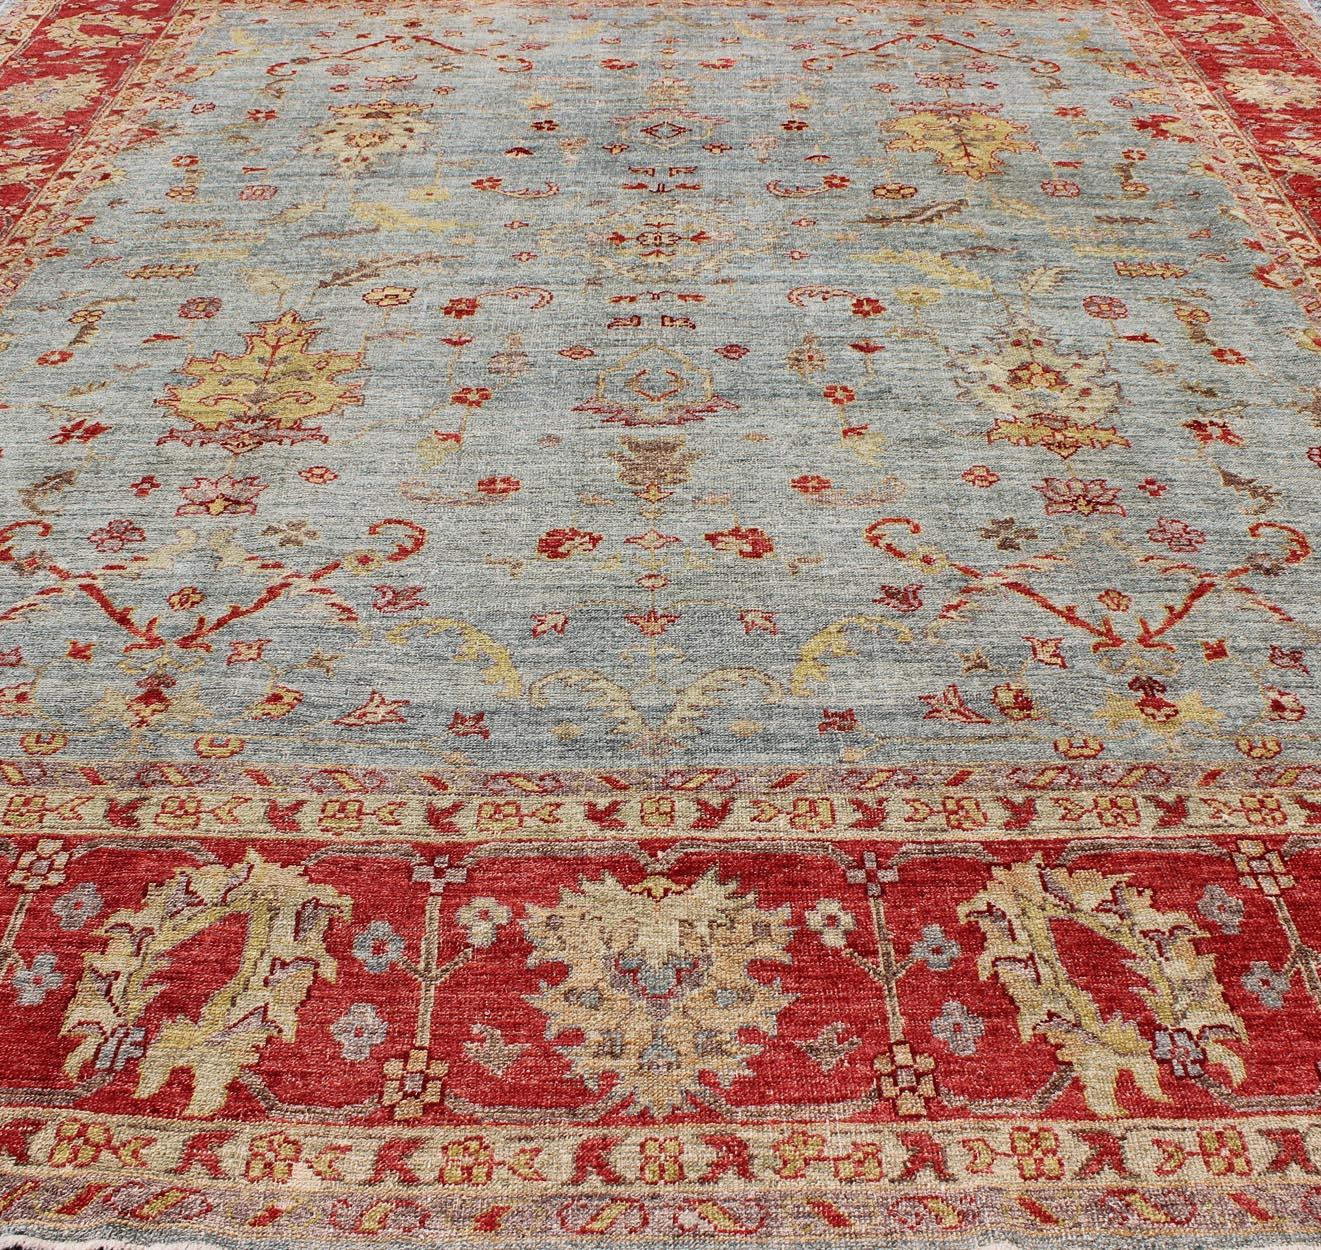 Wool Angora Oushak Large Turkish Rug in Raspberry Red, Light Blue For Sale